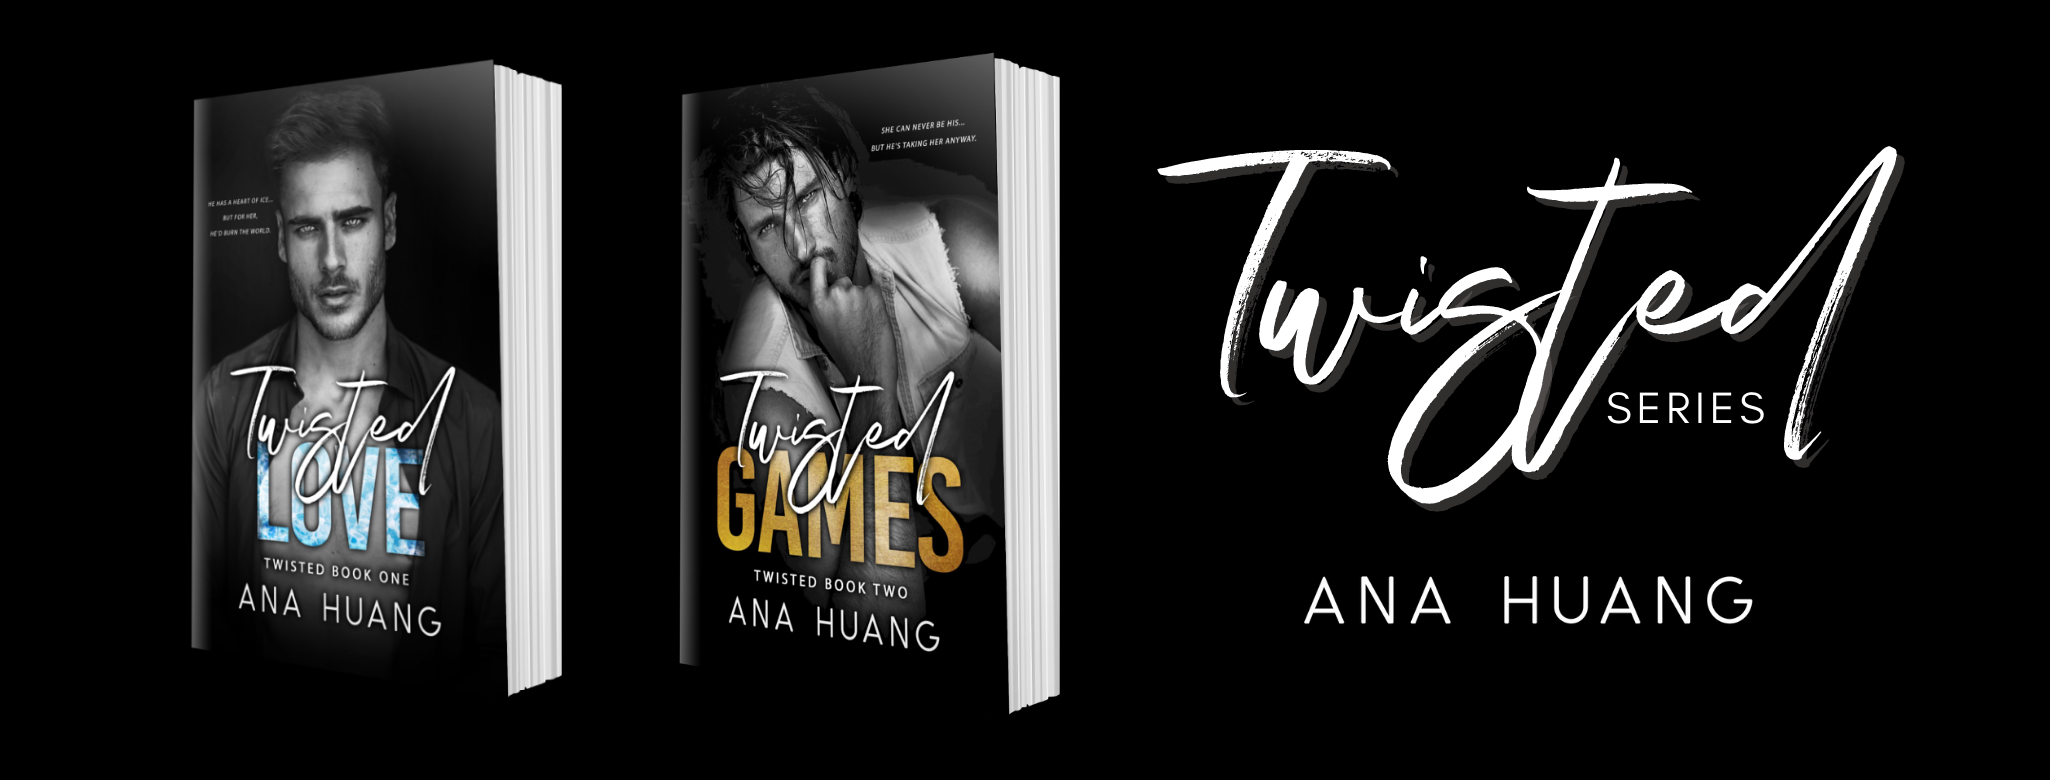 Release Blitz and Review: Twisted Love (Twisted Book 1), by Ana